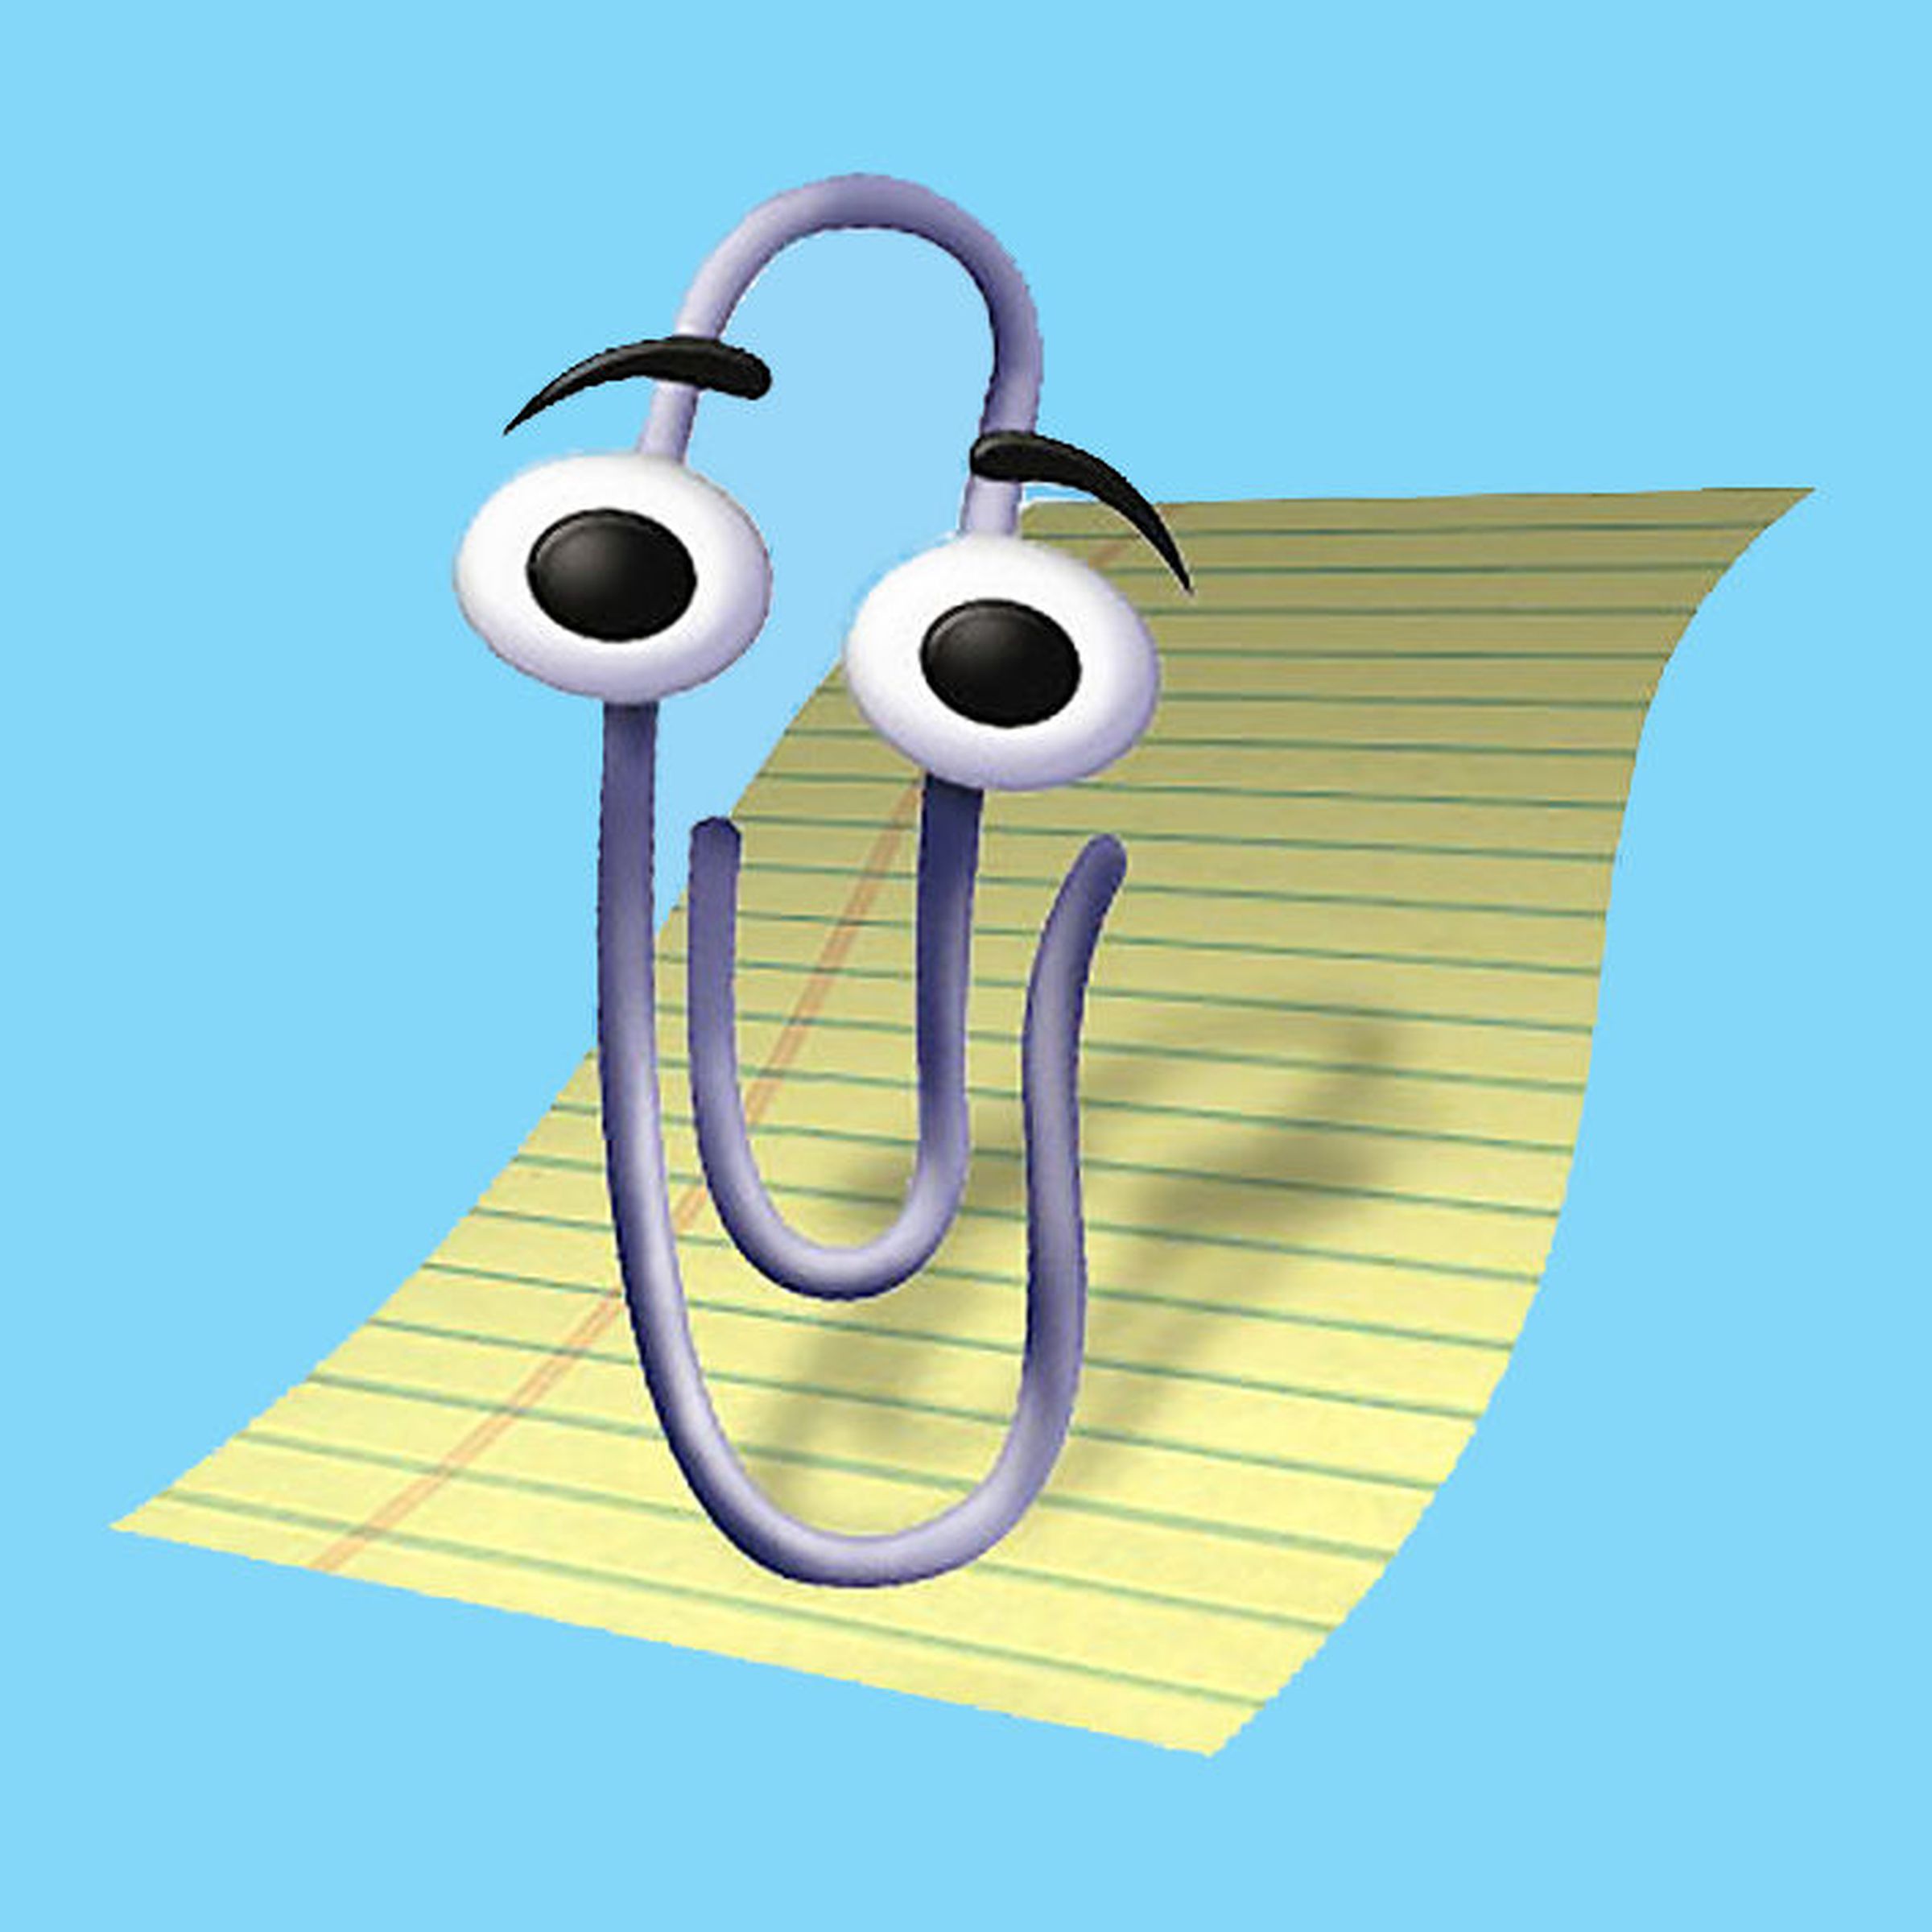 Clippy on ruled paper.